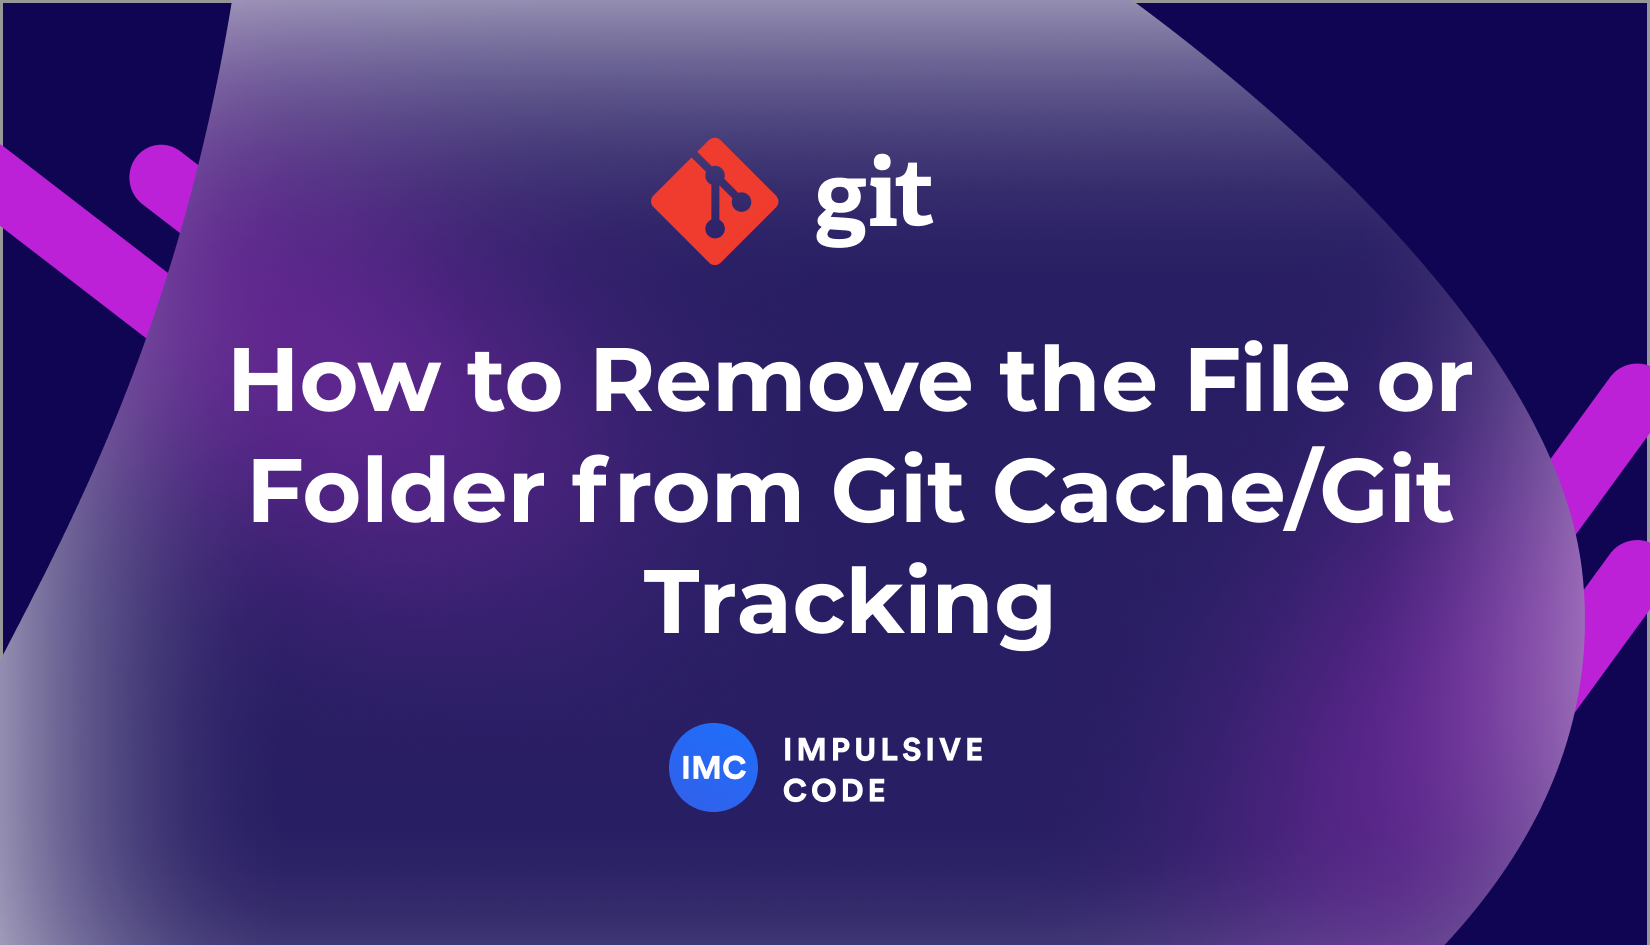 How to Remove the File or Folder from Git Cache/Git Tracking